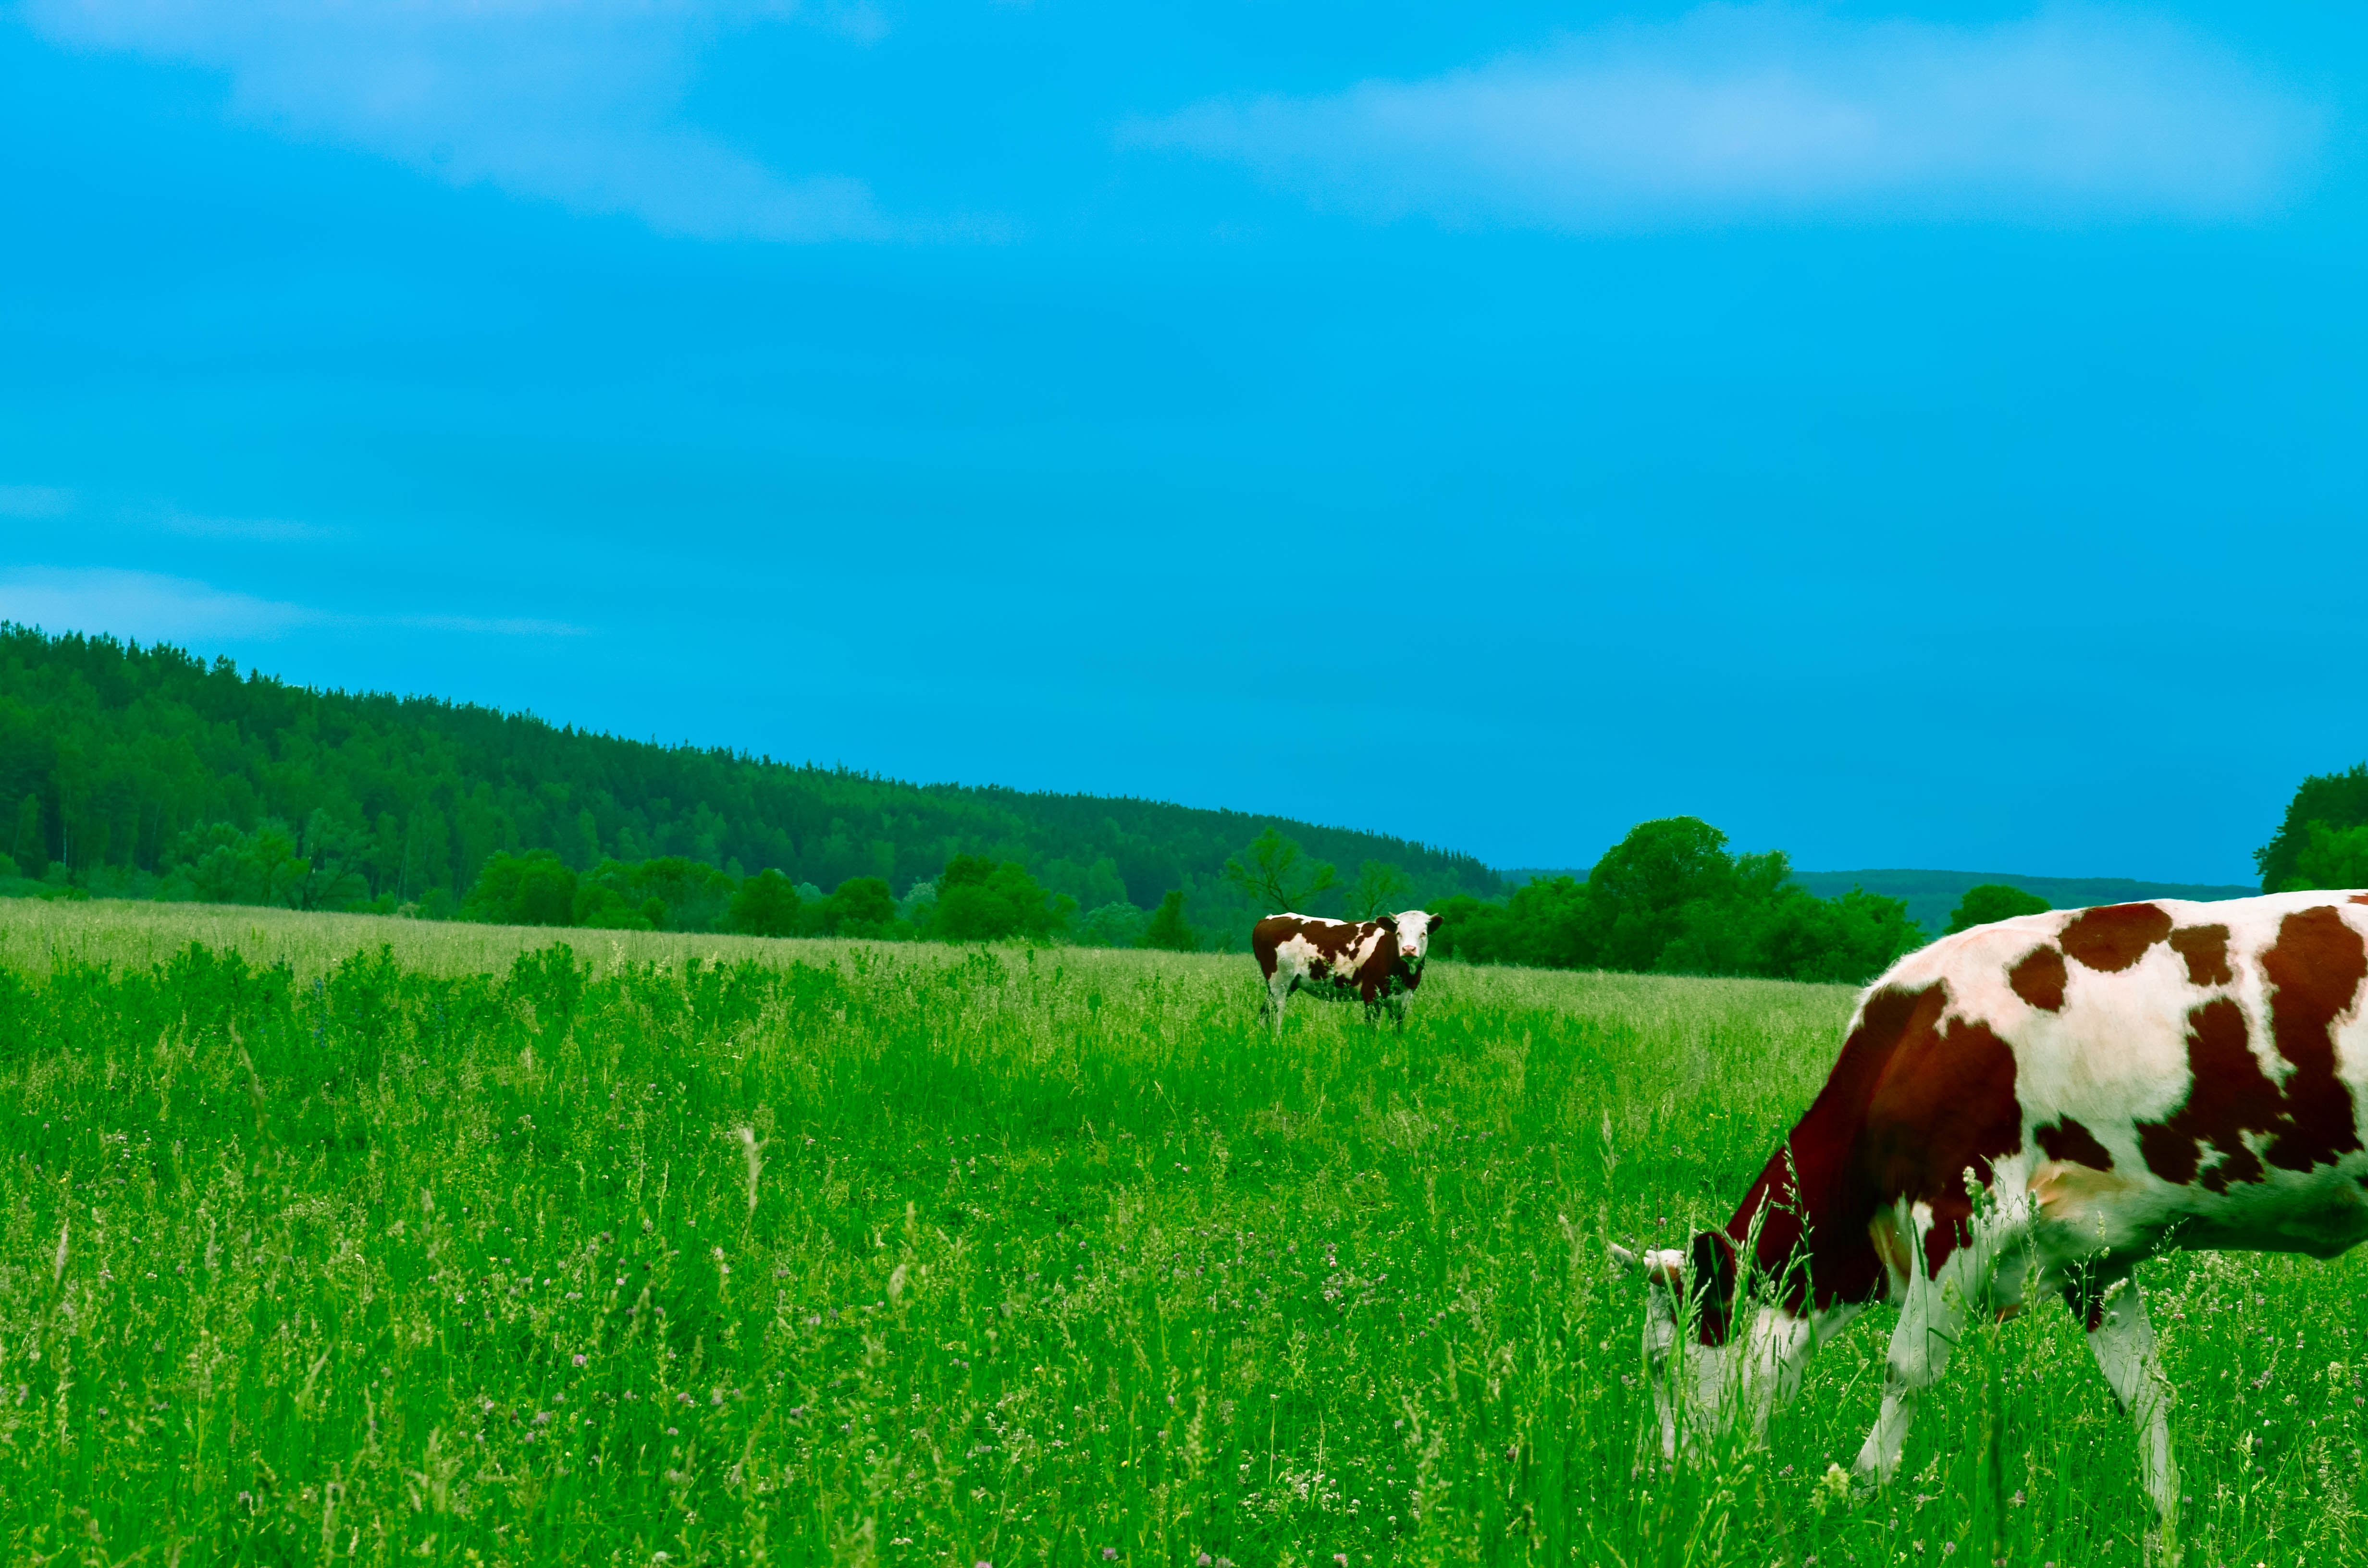 Cows grazing on field against sky photo